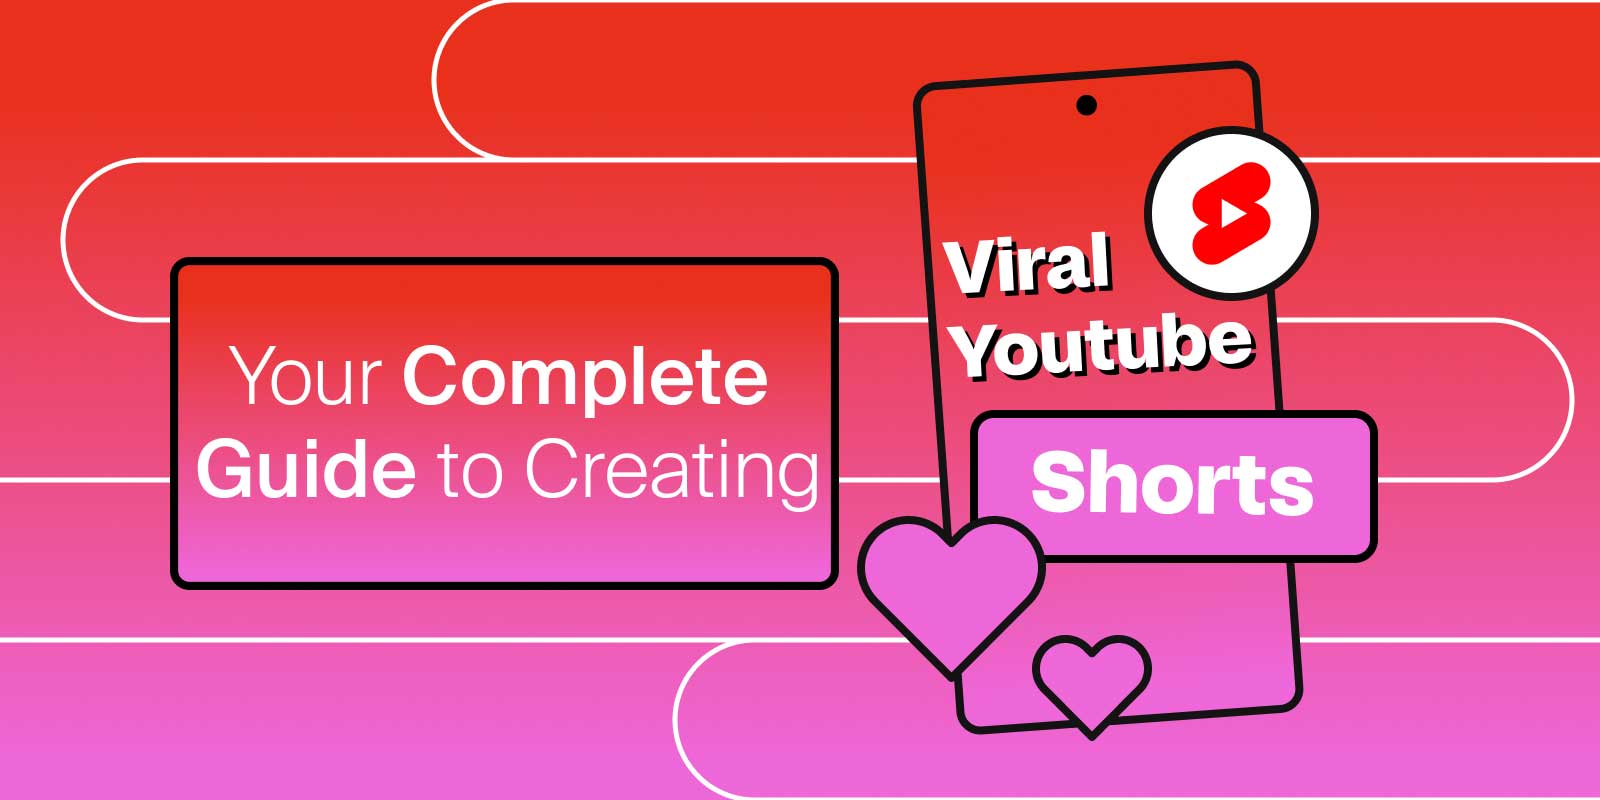 Your Complete Guide to Creating Viral YouTube Shorts